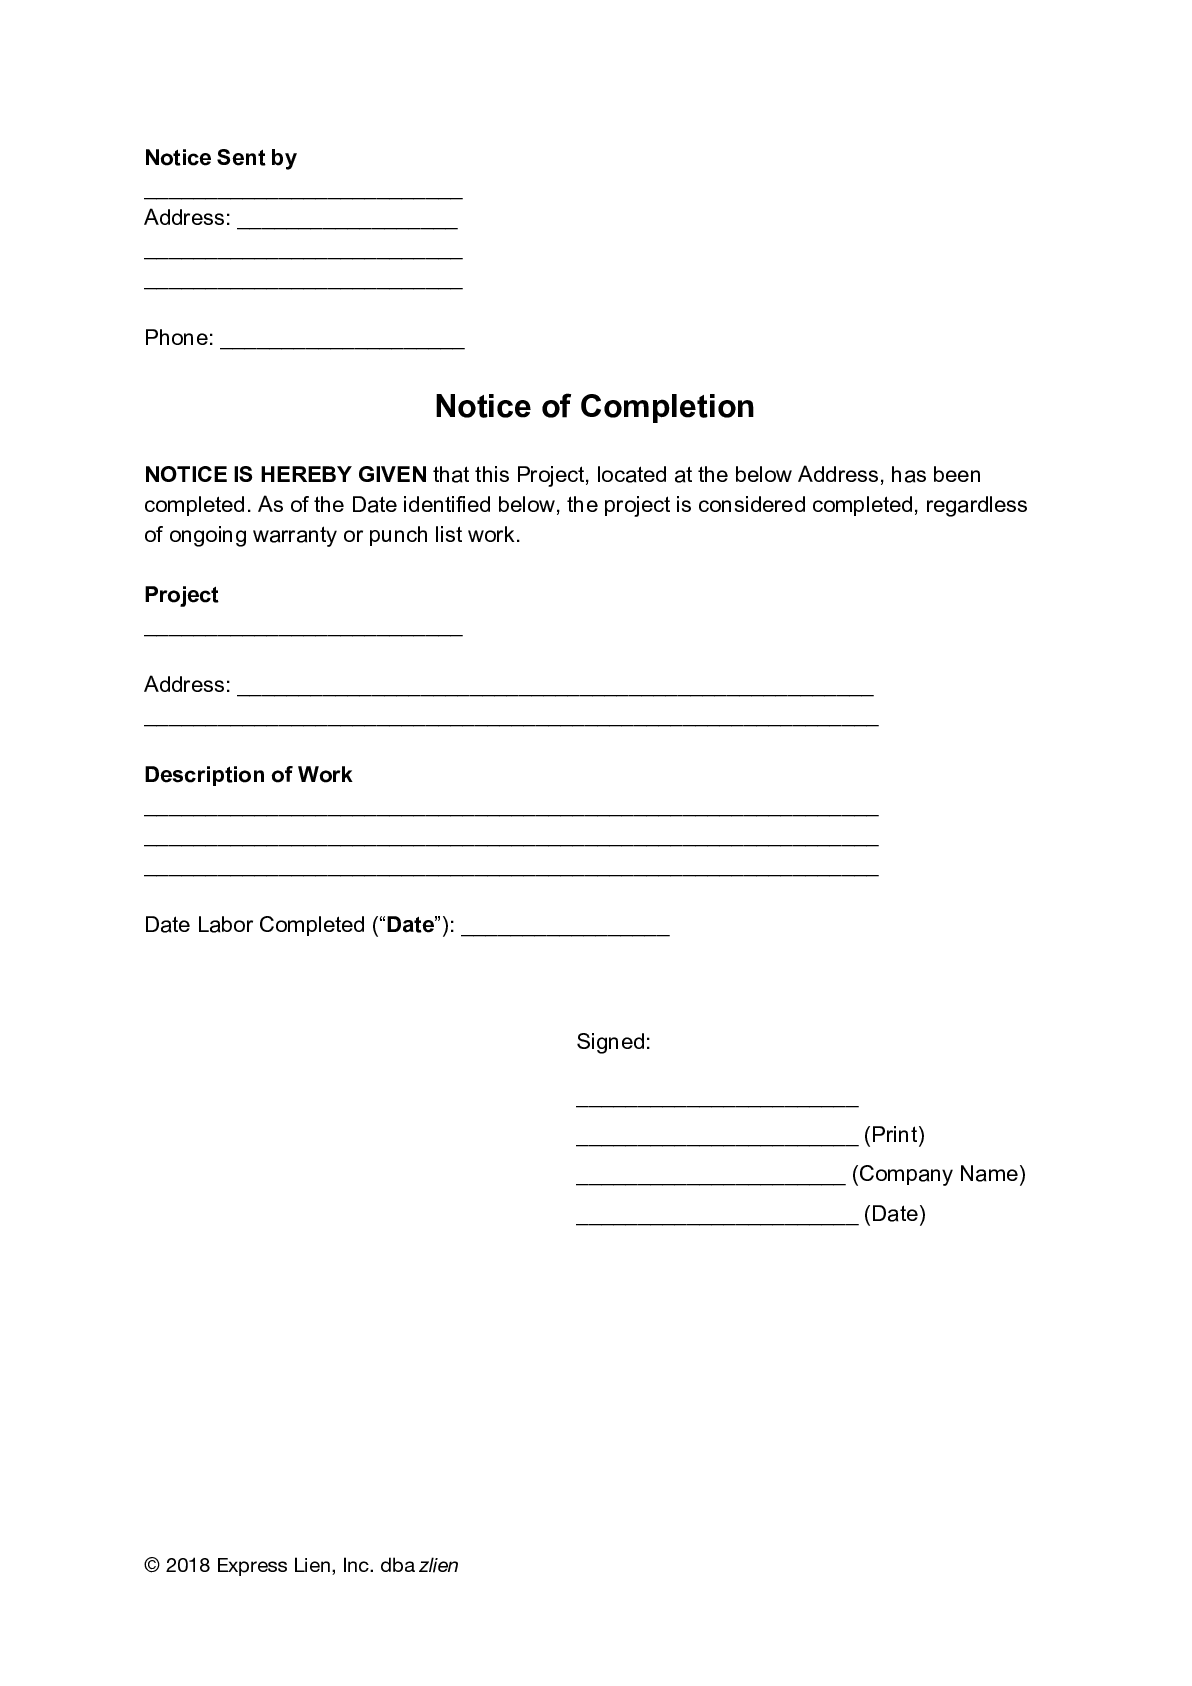 Notice of Completion (General) Form - free from